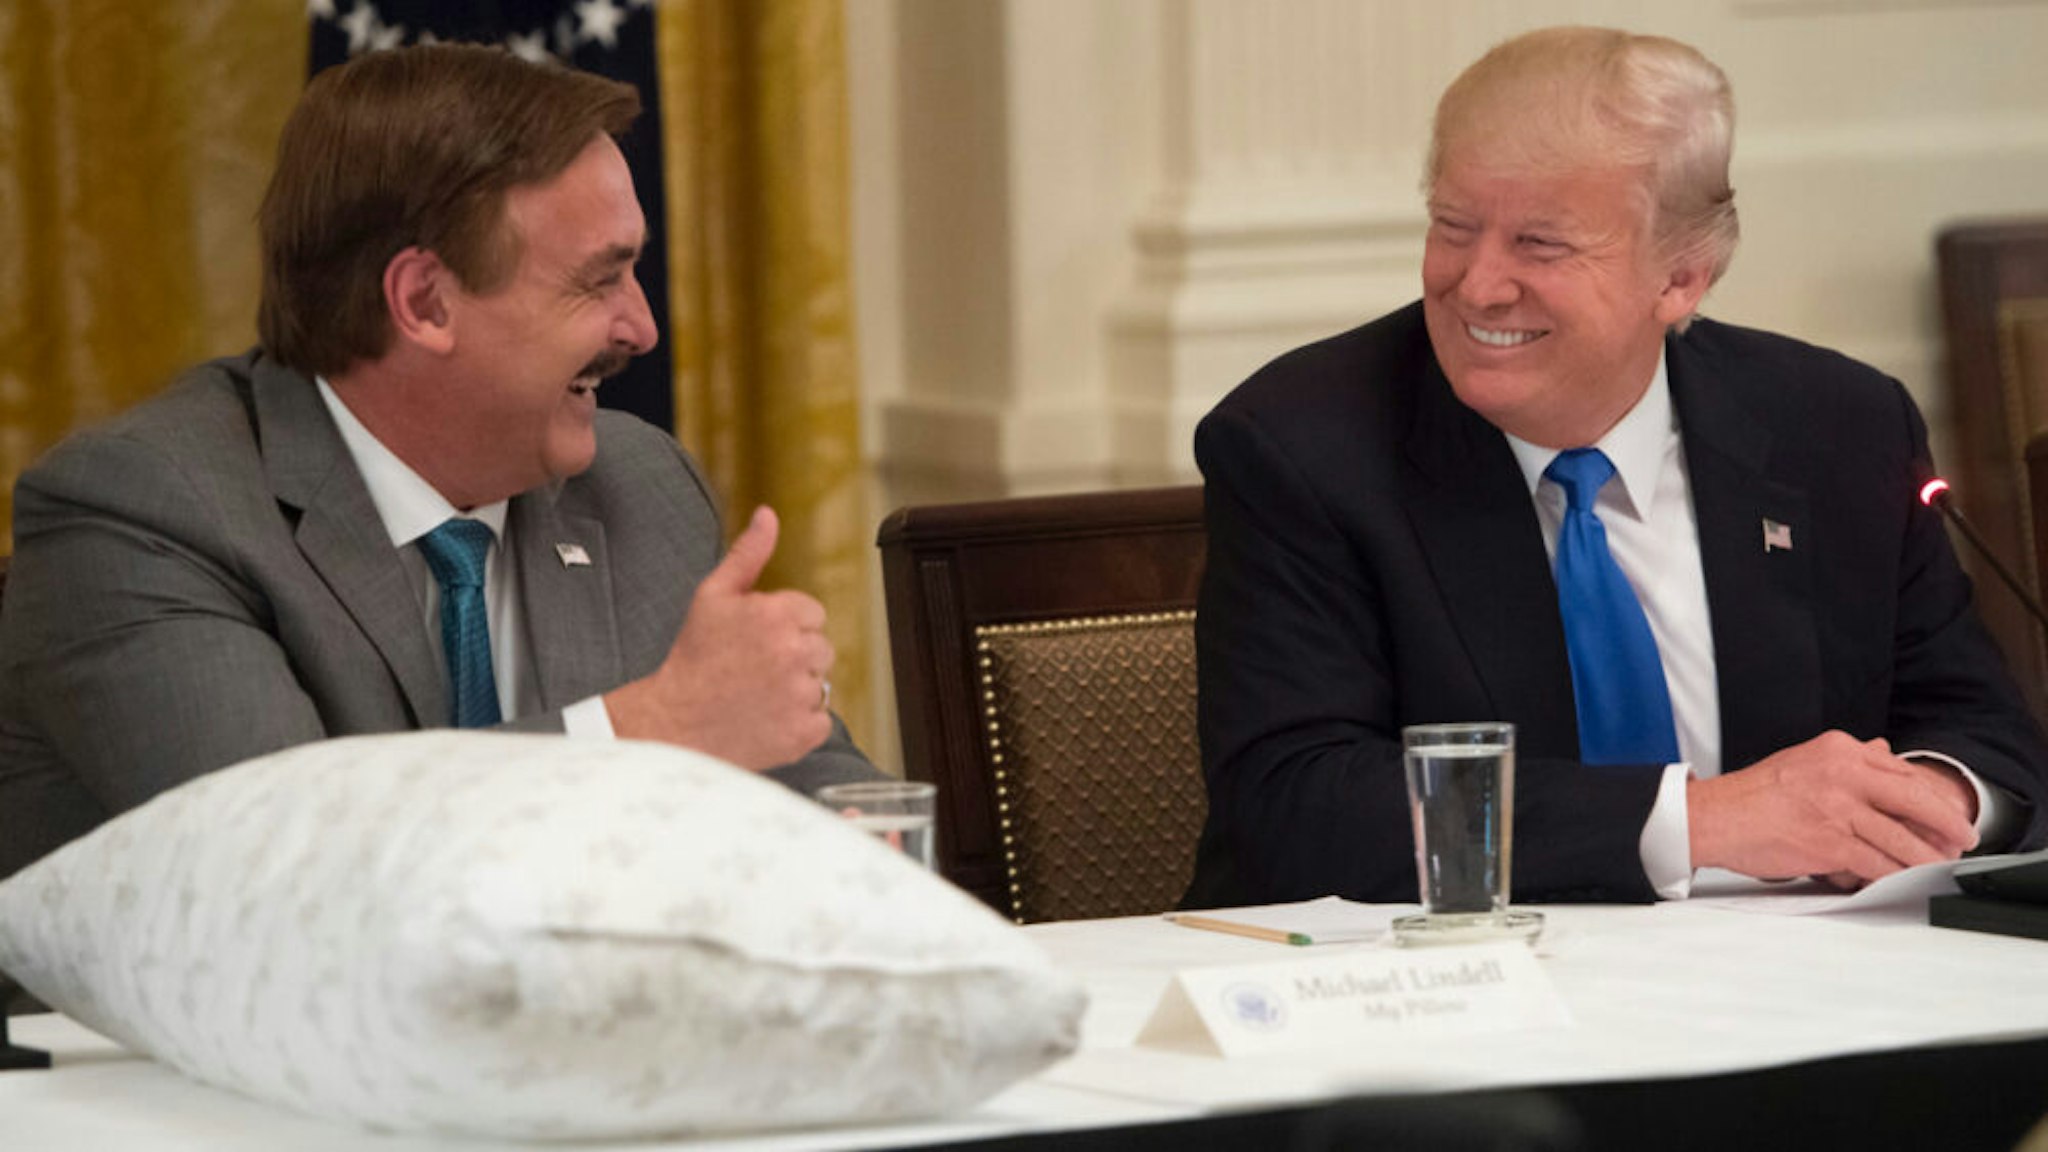 US President Donald Trump speaks alongside Mike Lindell (L), founder of My Pillow, during a Made in America event with US manufacturers in the East Room of the White House in Washington, DC, July 19, 2017.